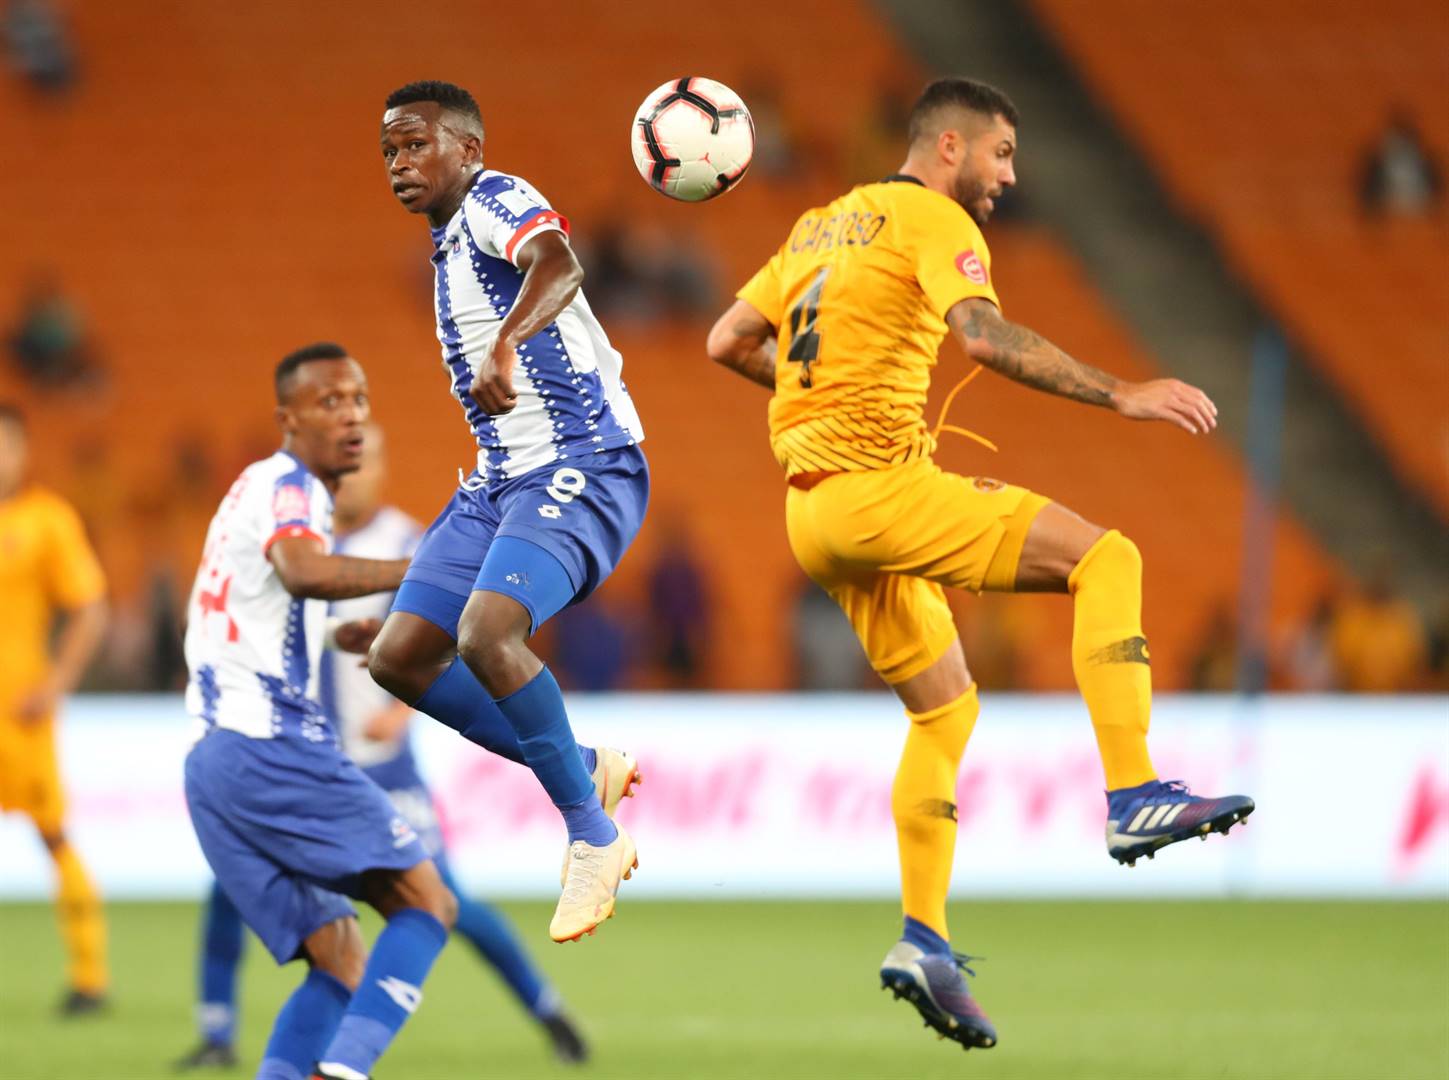 Siphesihle Ndlovu of Maritzburg United and Daniel Cardoso of Kaizer Chiefs seem to be engaged in some crazy dance rather than a football match during the two sides’ Absa Premiership match at FNB Stadium last evening. Picture: Samuel Shivambu / BackpagePix